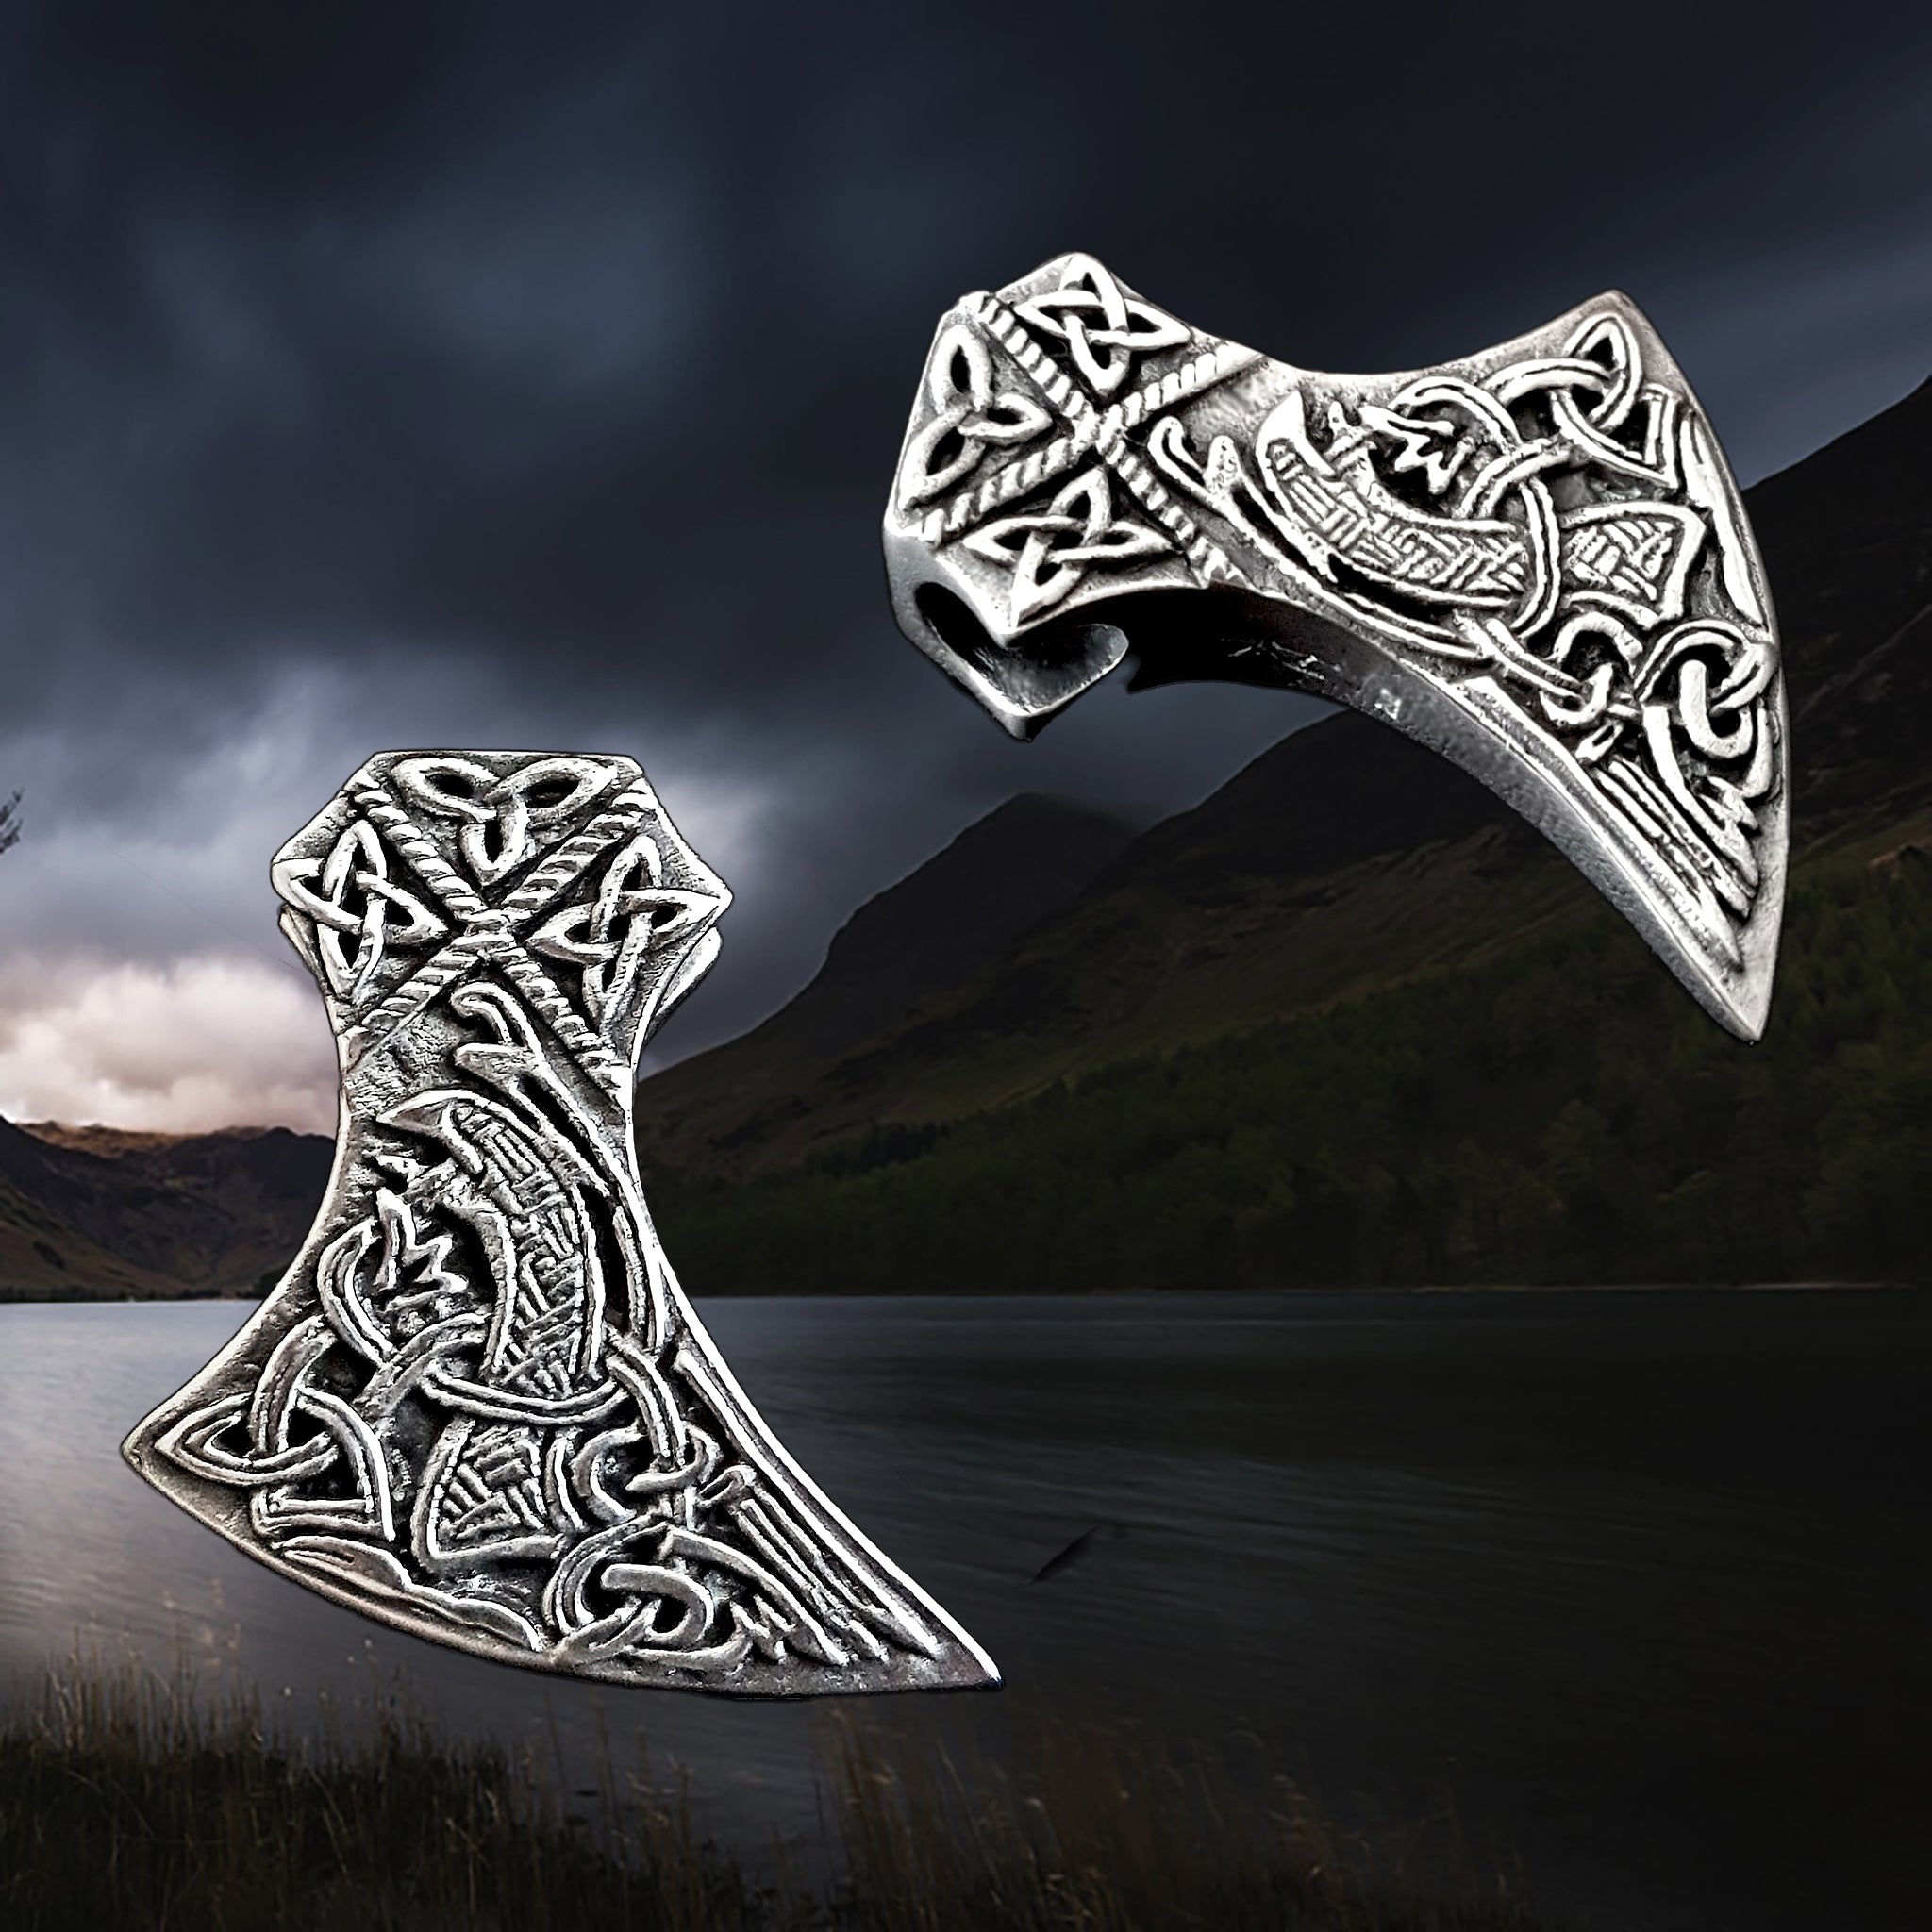 Silver Knotwork Viking Axe Head Pendants - Front and Angle View